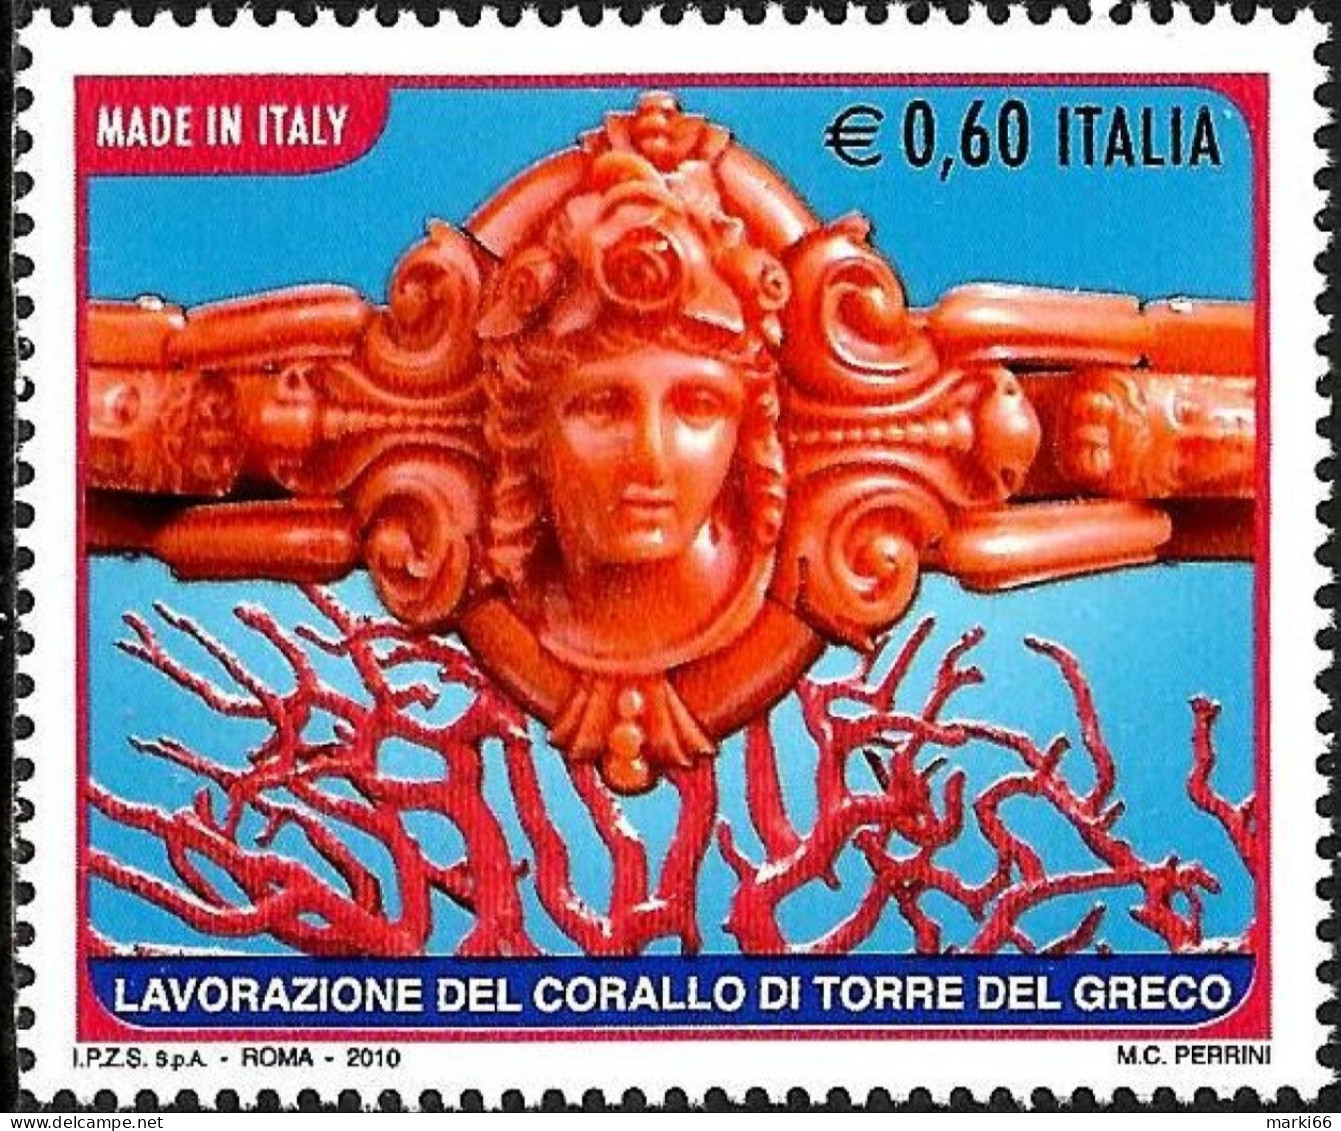 Italy - 2010 - Made In Italy - Coral Decorations - Mint Stamp - 2001-10: Nieuw/plakker